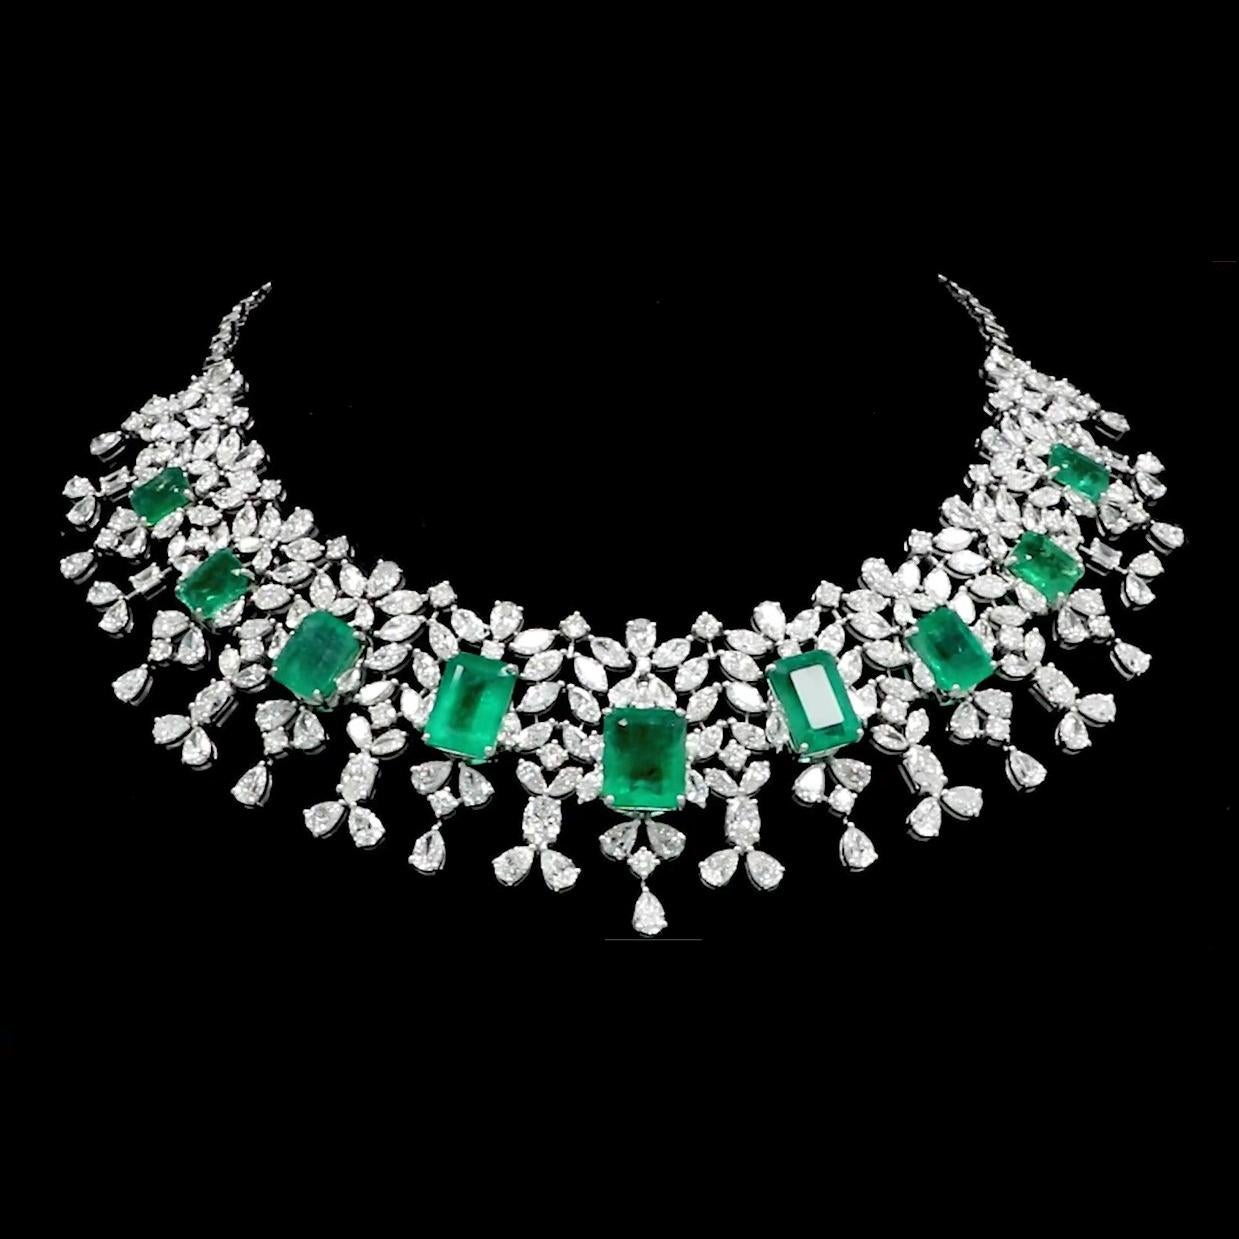 Item Code :- SEN-5246
Gross Wt. :- 98.49 gm
18k White Gold Wt. :- 80.75 gm
Natural Diamond Wt. :- 49.15 Ct. ( AVERAGE DIAMOND CLARITY SI1-SI2 & COLOR H-I )
Emerald Wt. :- 39.54 Ct.
Necklace Size :- 16 Inches Long

✦ Sizing
.....................
We